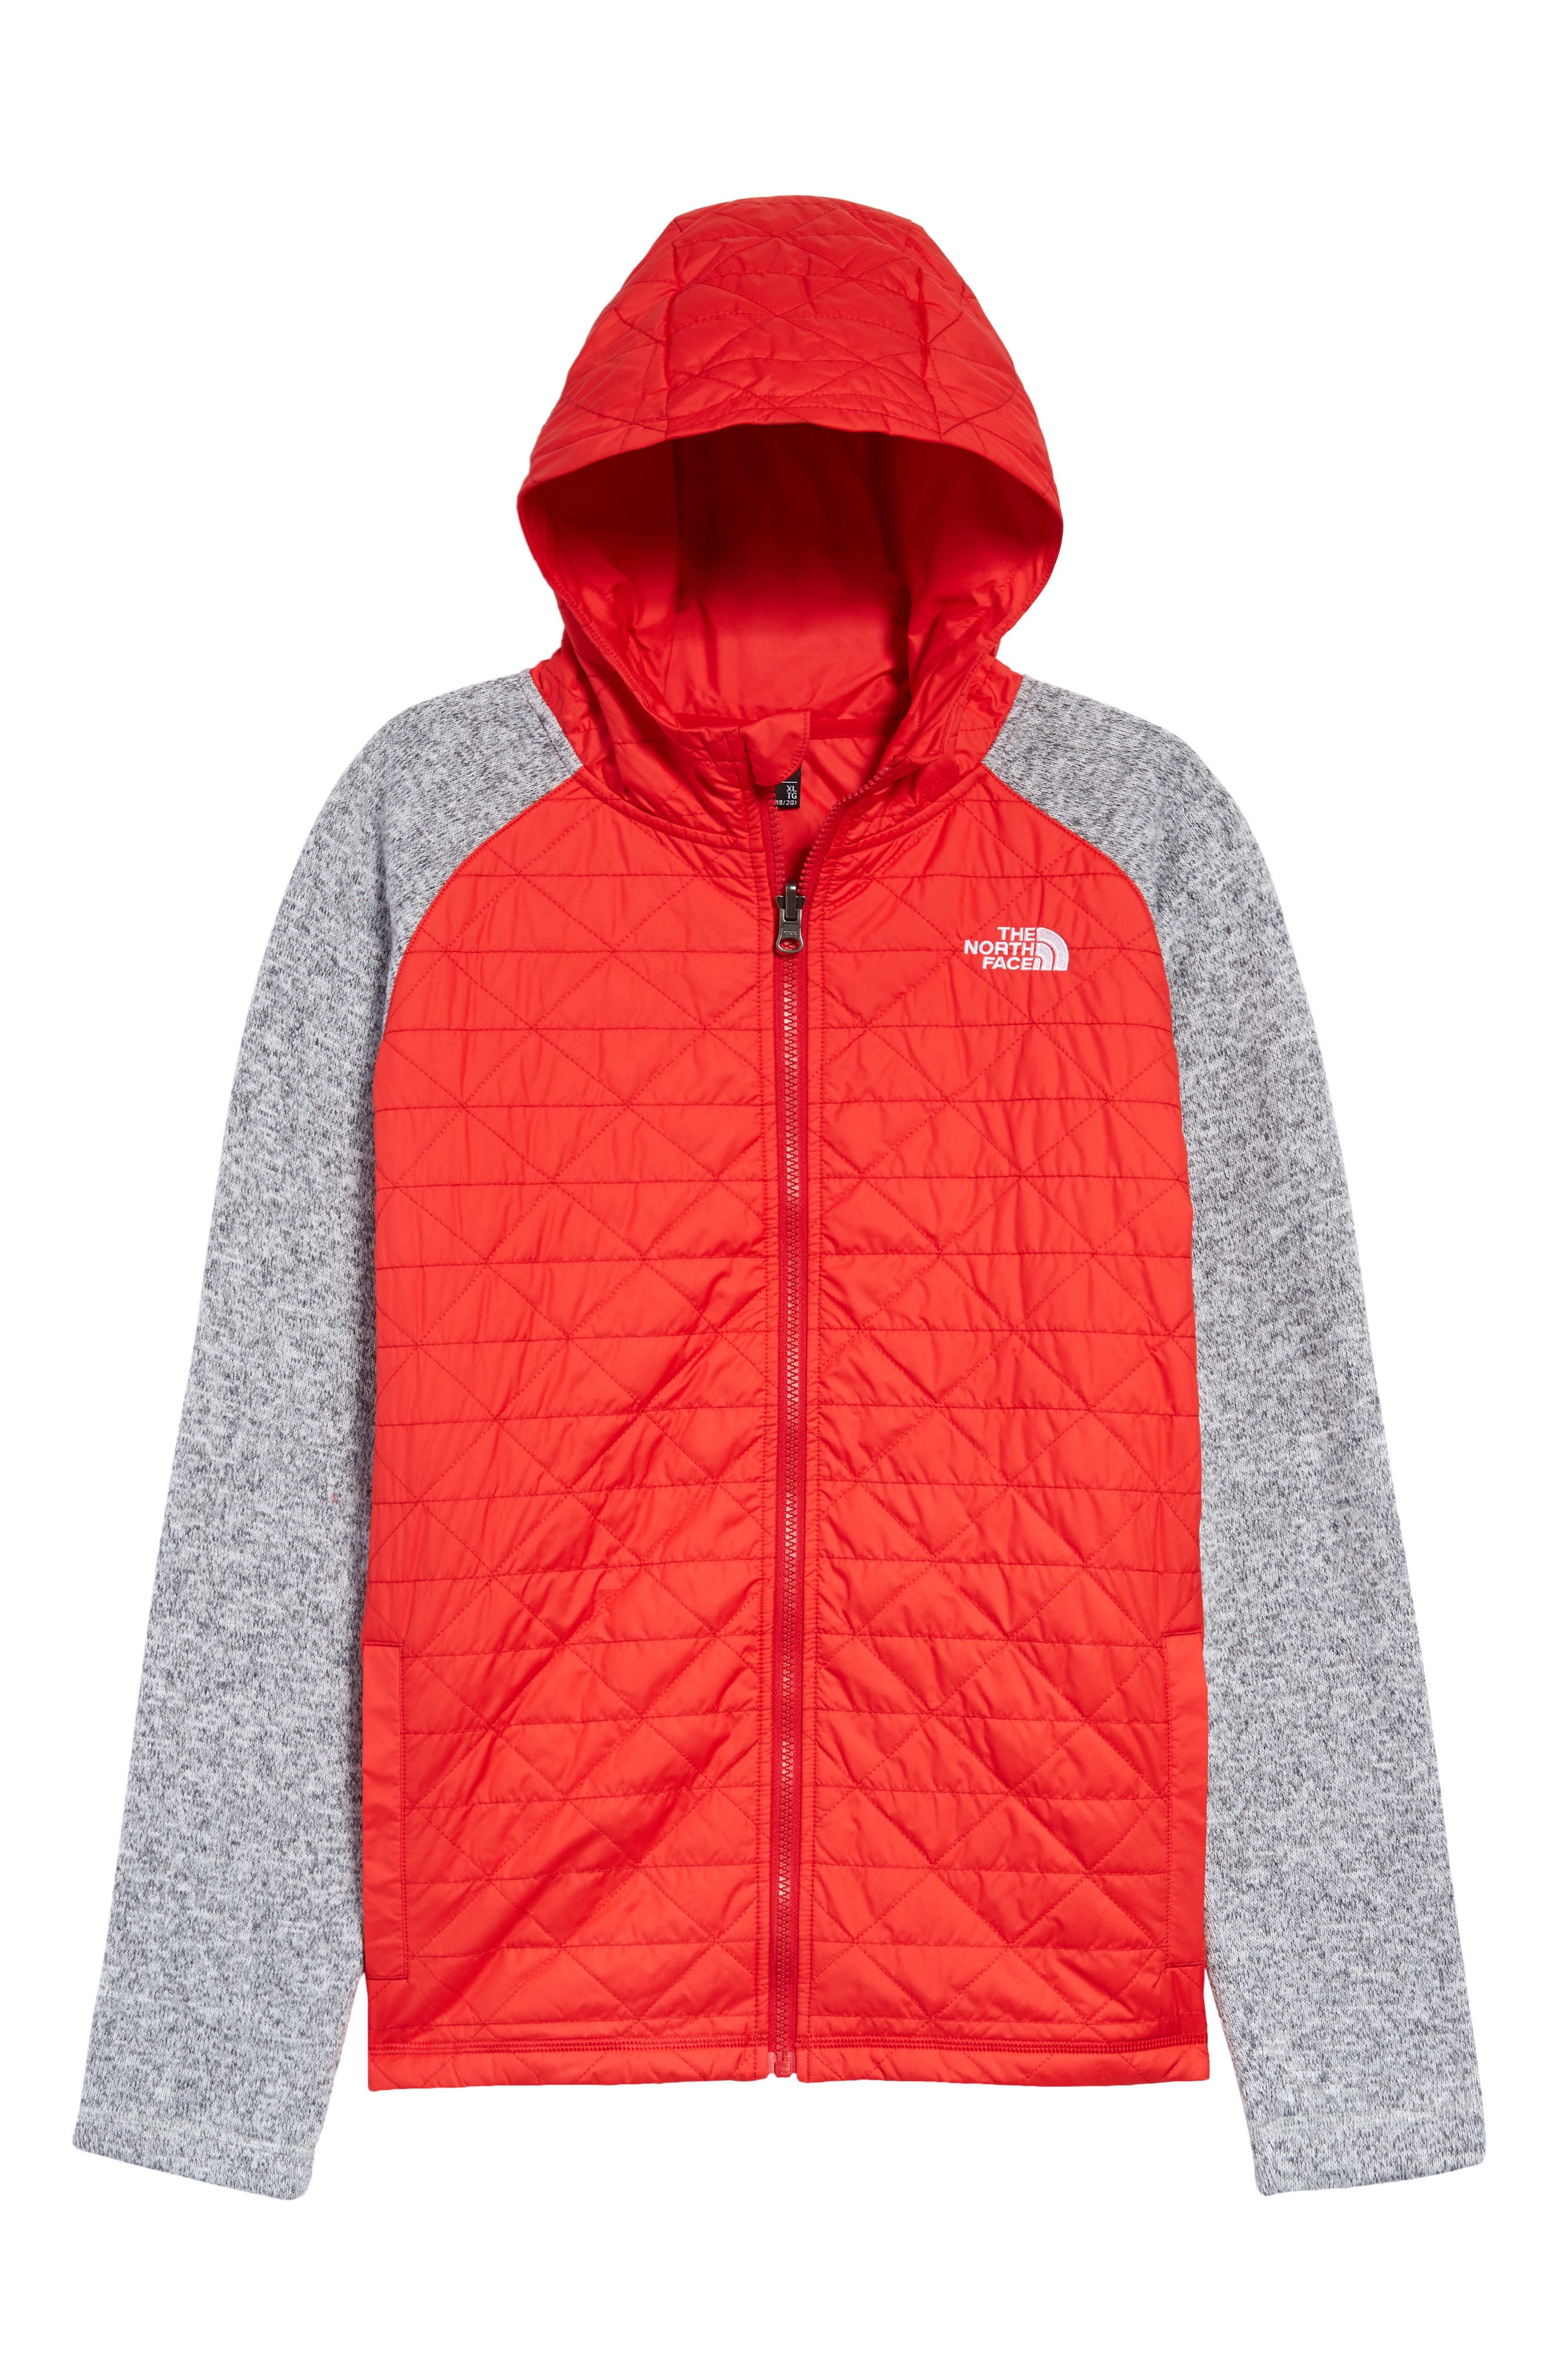 The North Face Kids' Quilted Sweater 